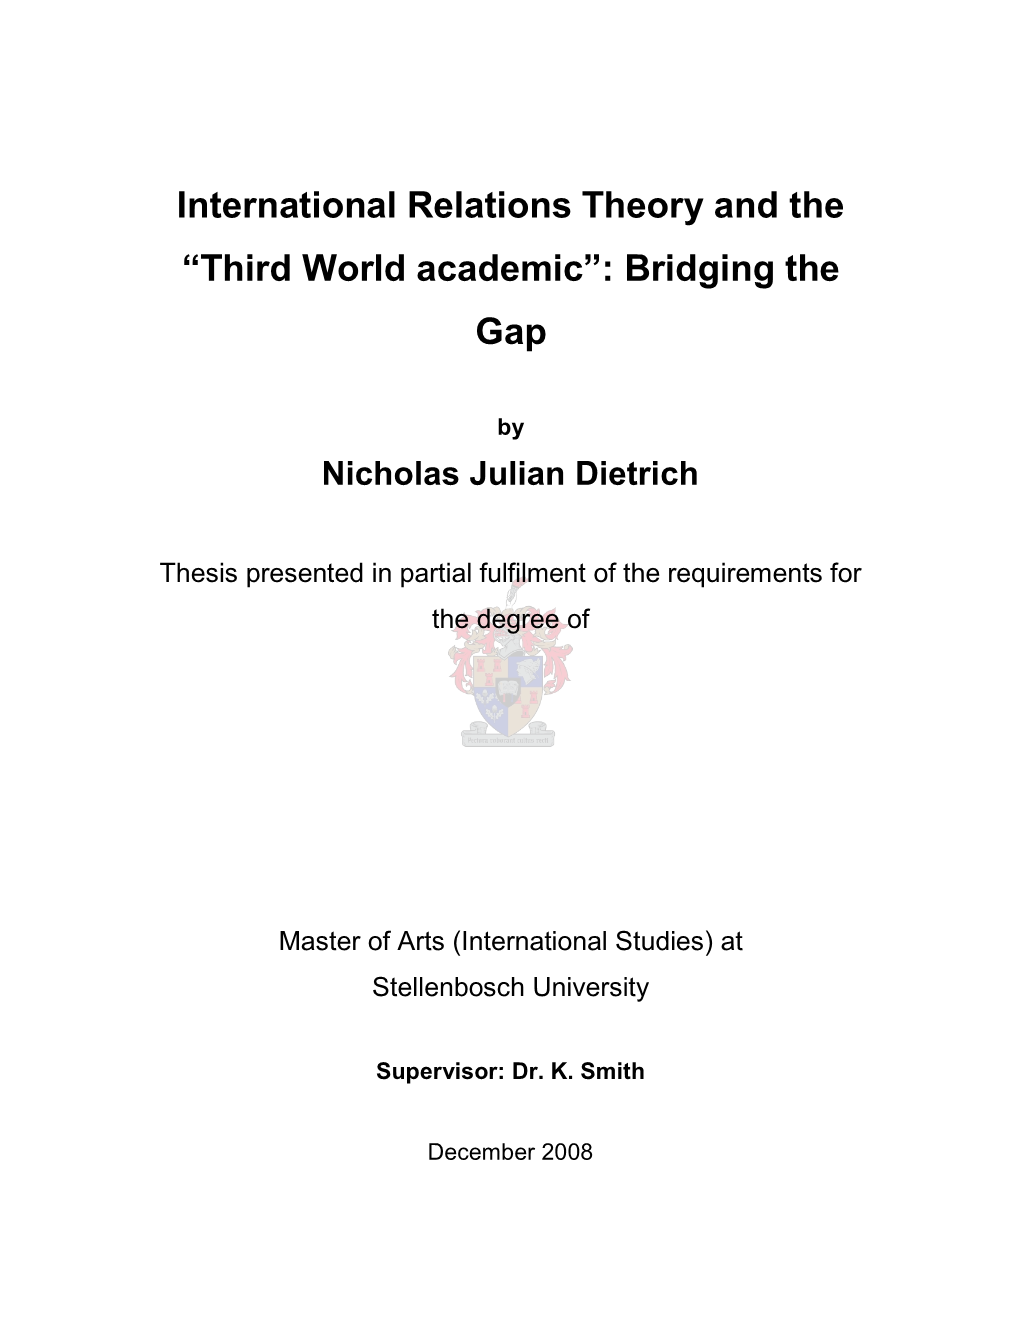 International Relations Theory and the "Third World Academic"